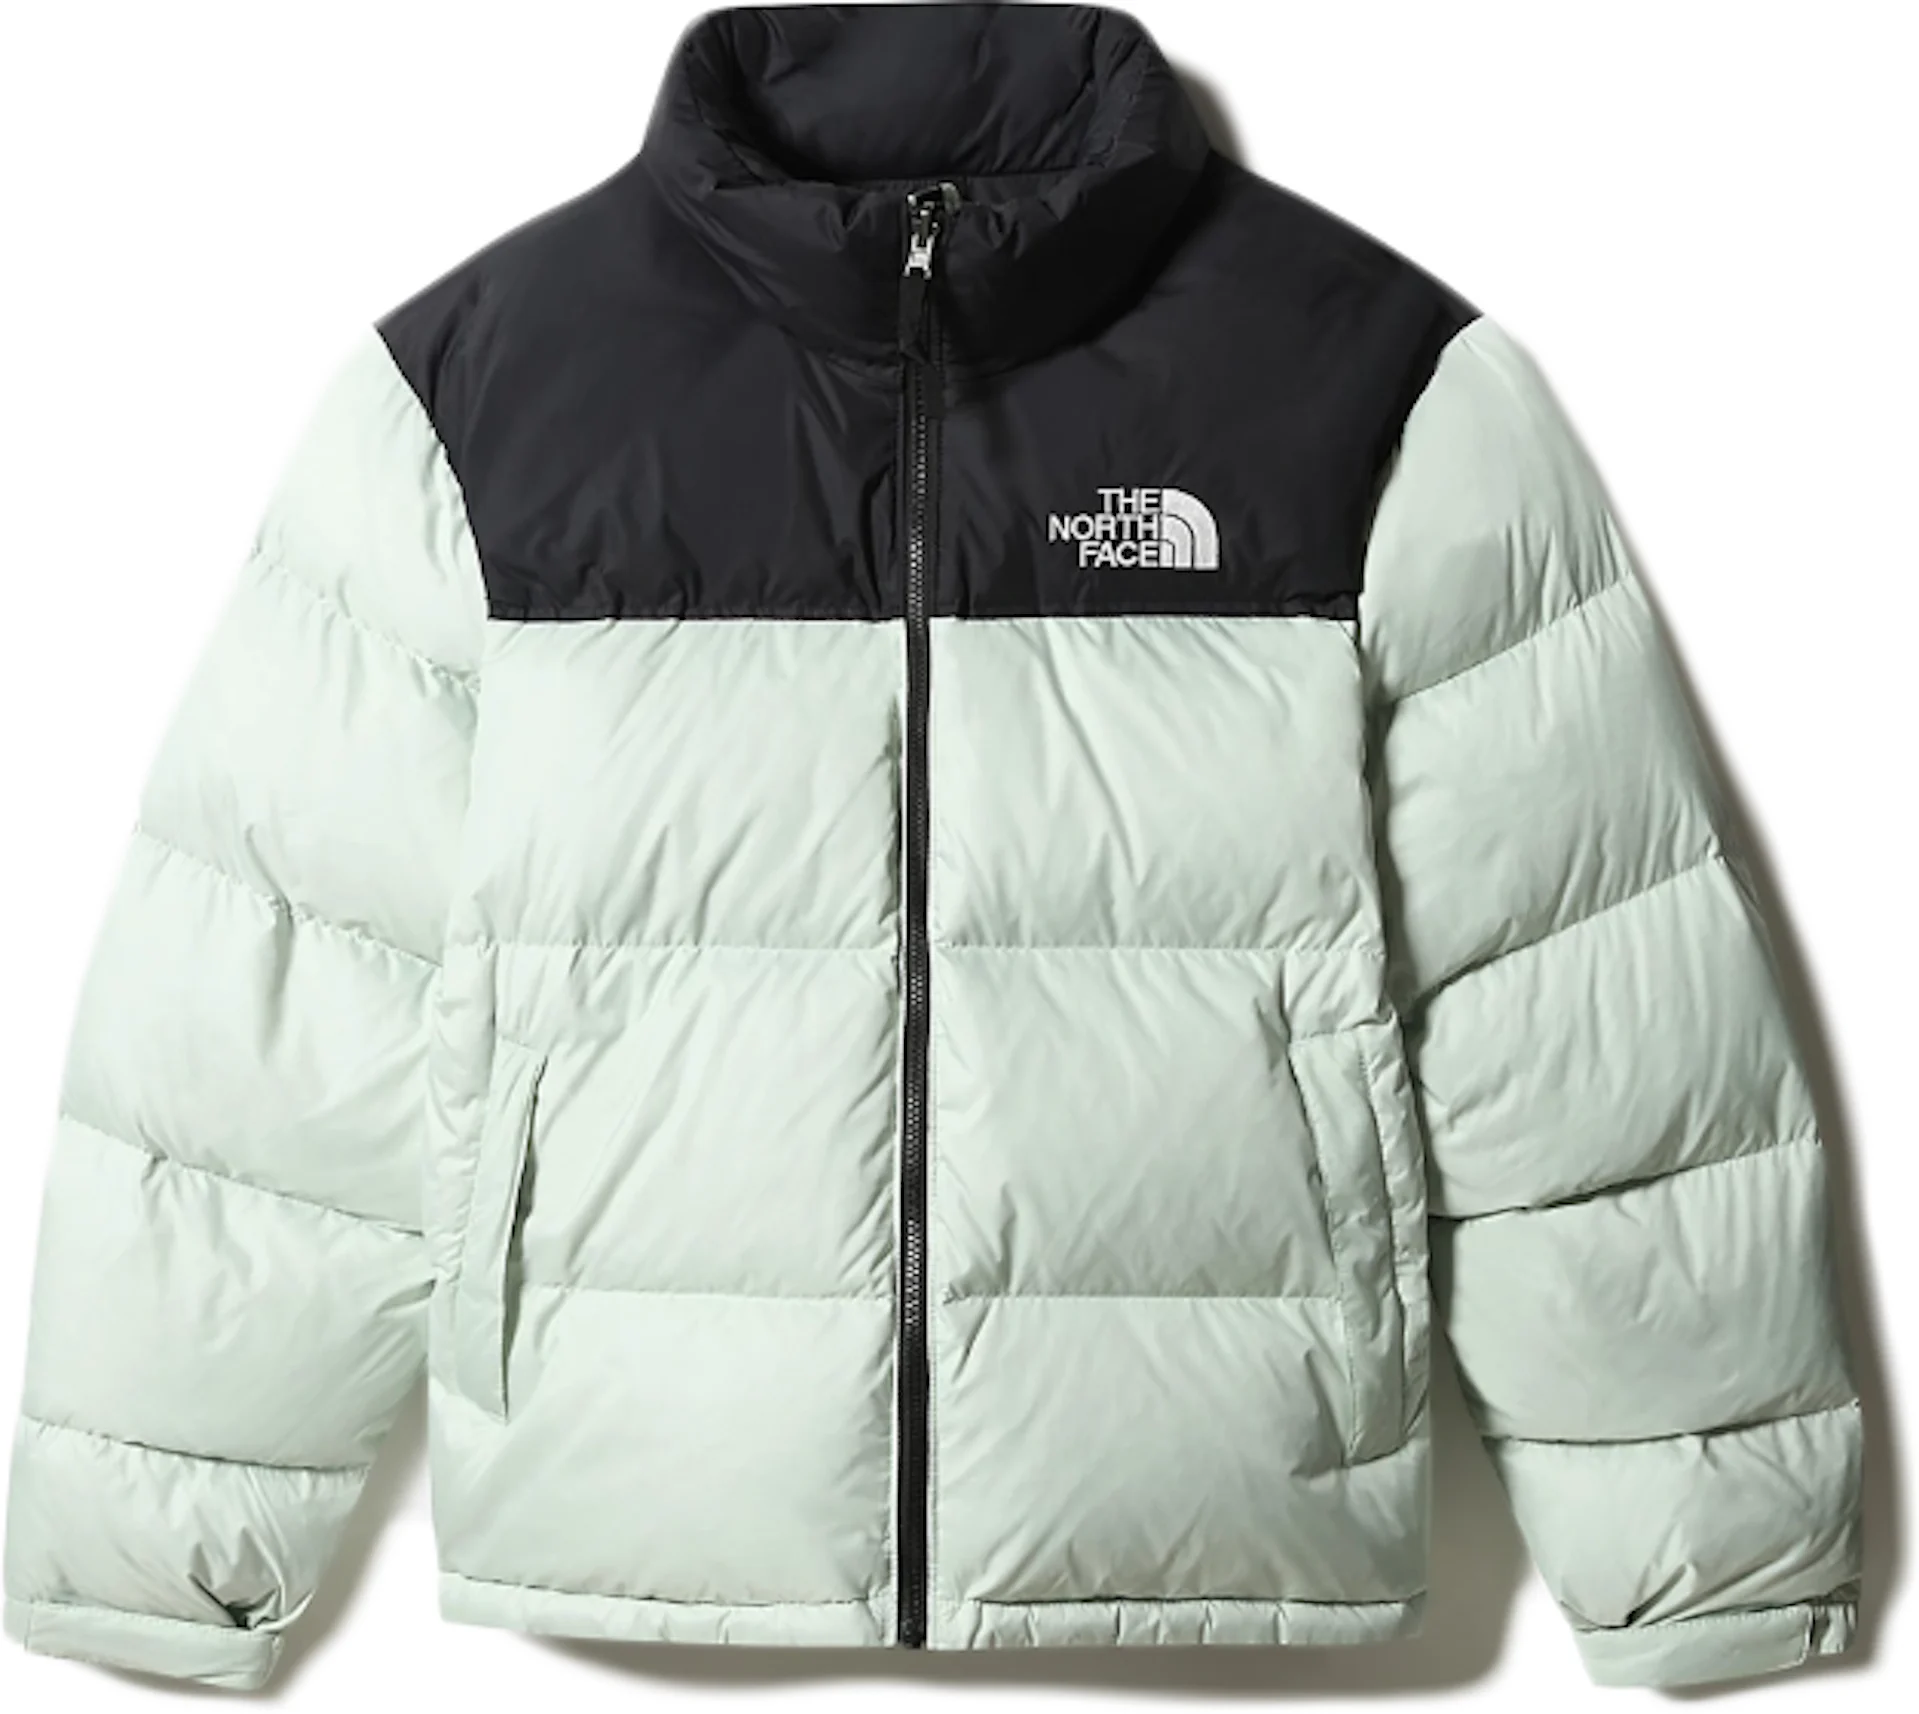 The North Face 1996 Retro Nuptse Packable Jacket Green Mist